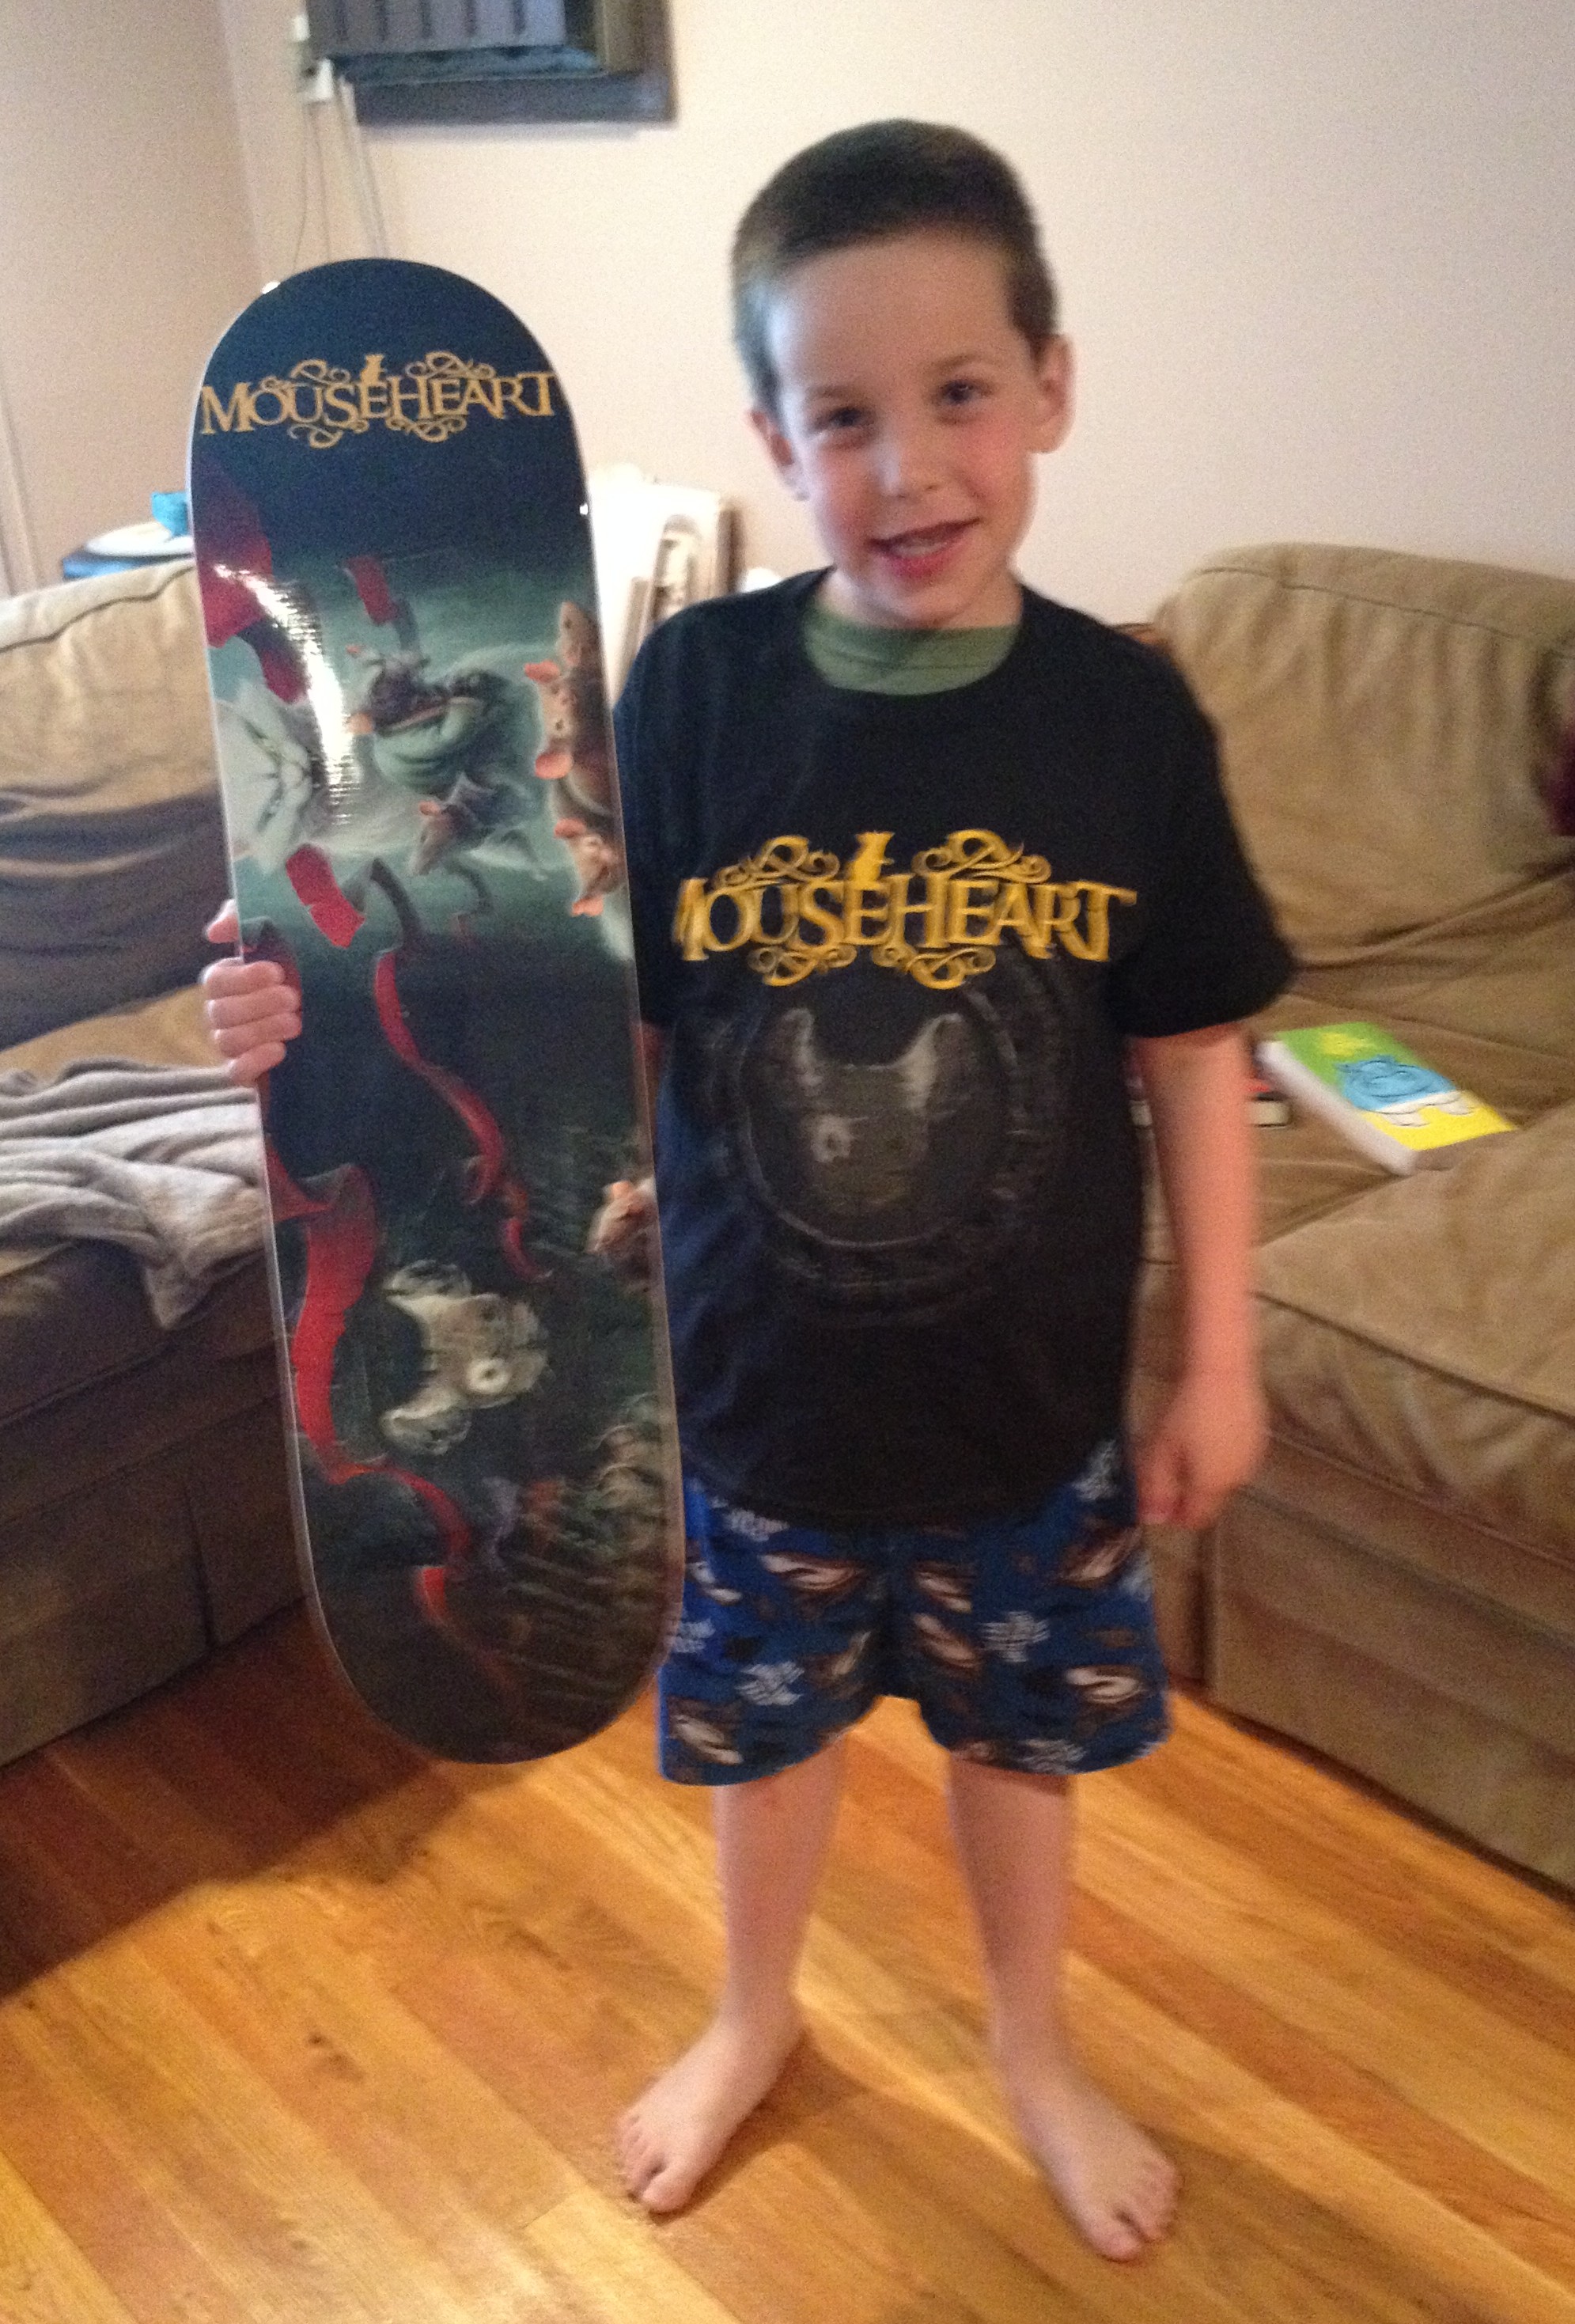 Ryan shows off his Mouseheart T-shirt and Skate Deck